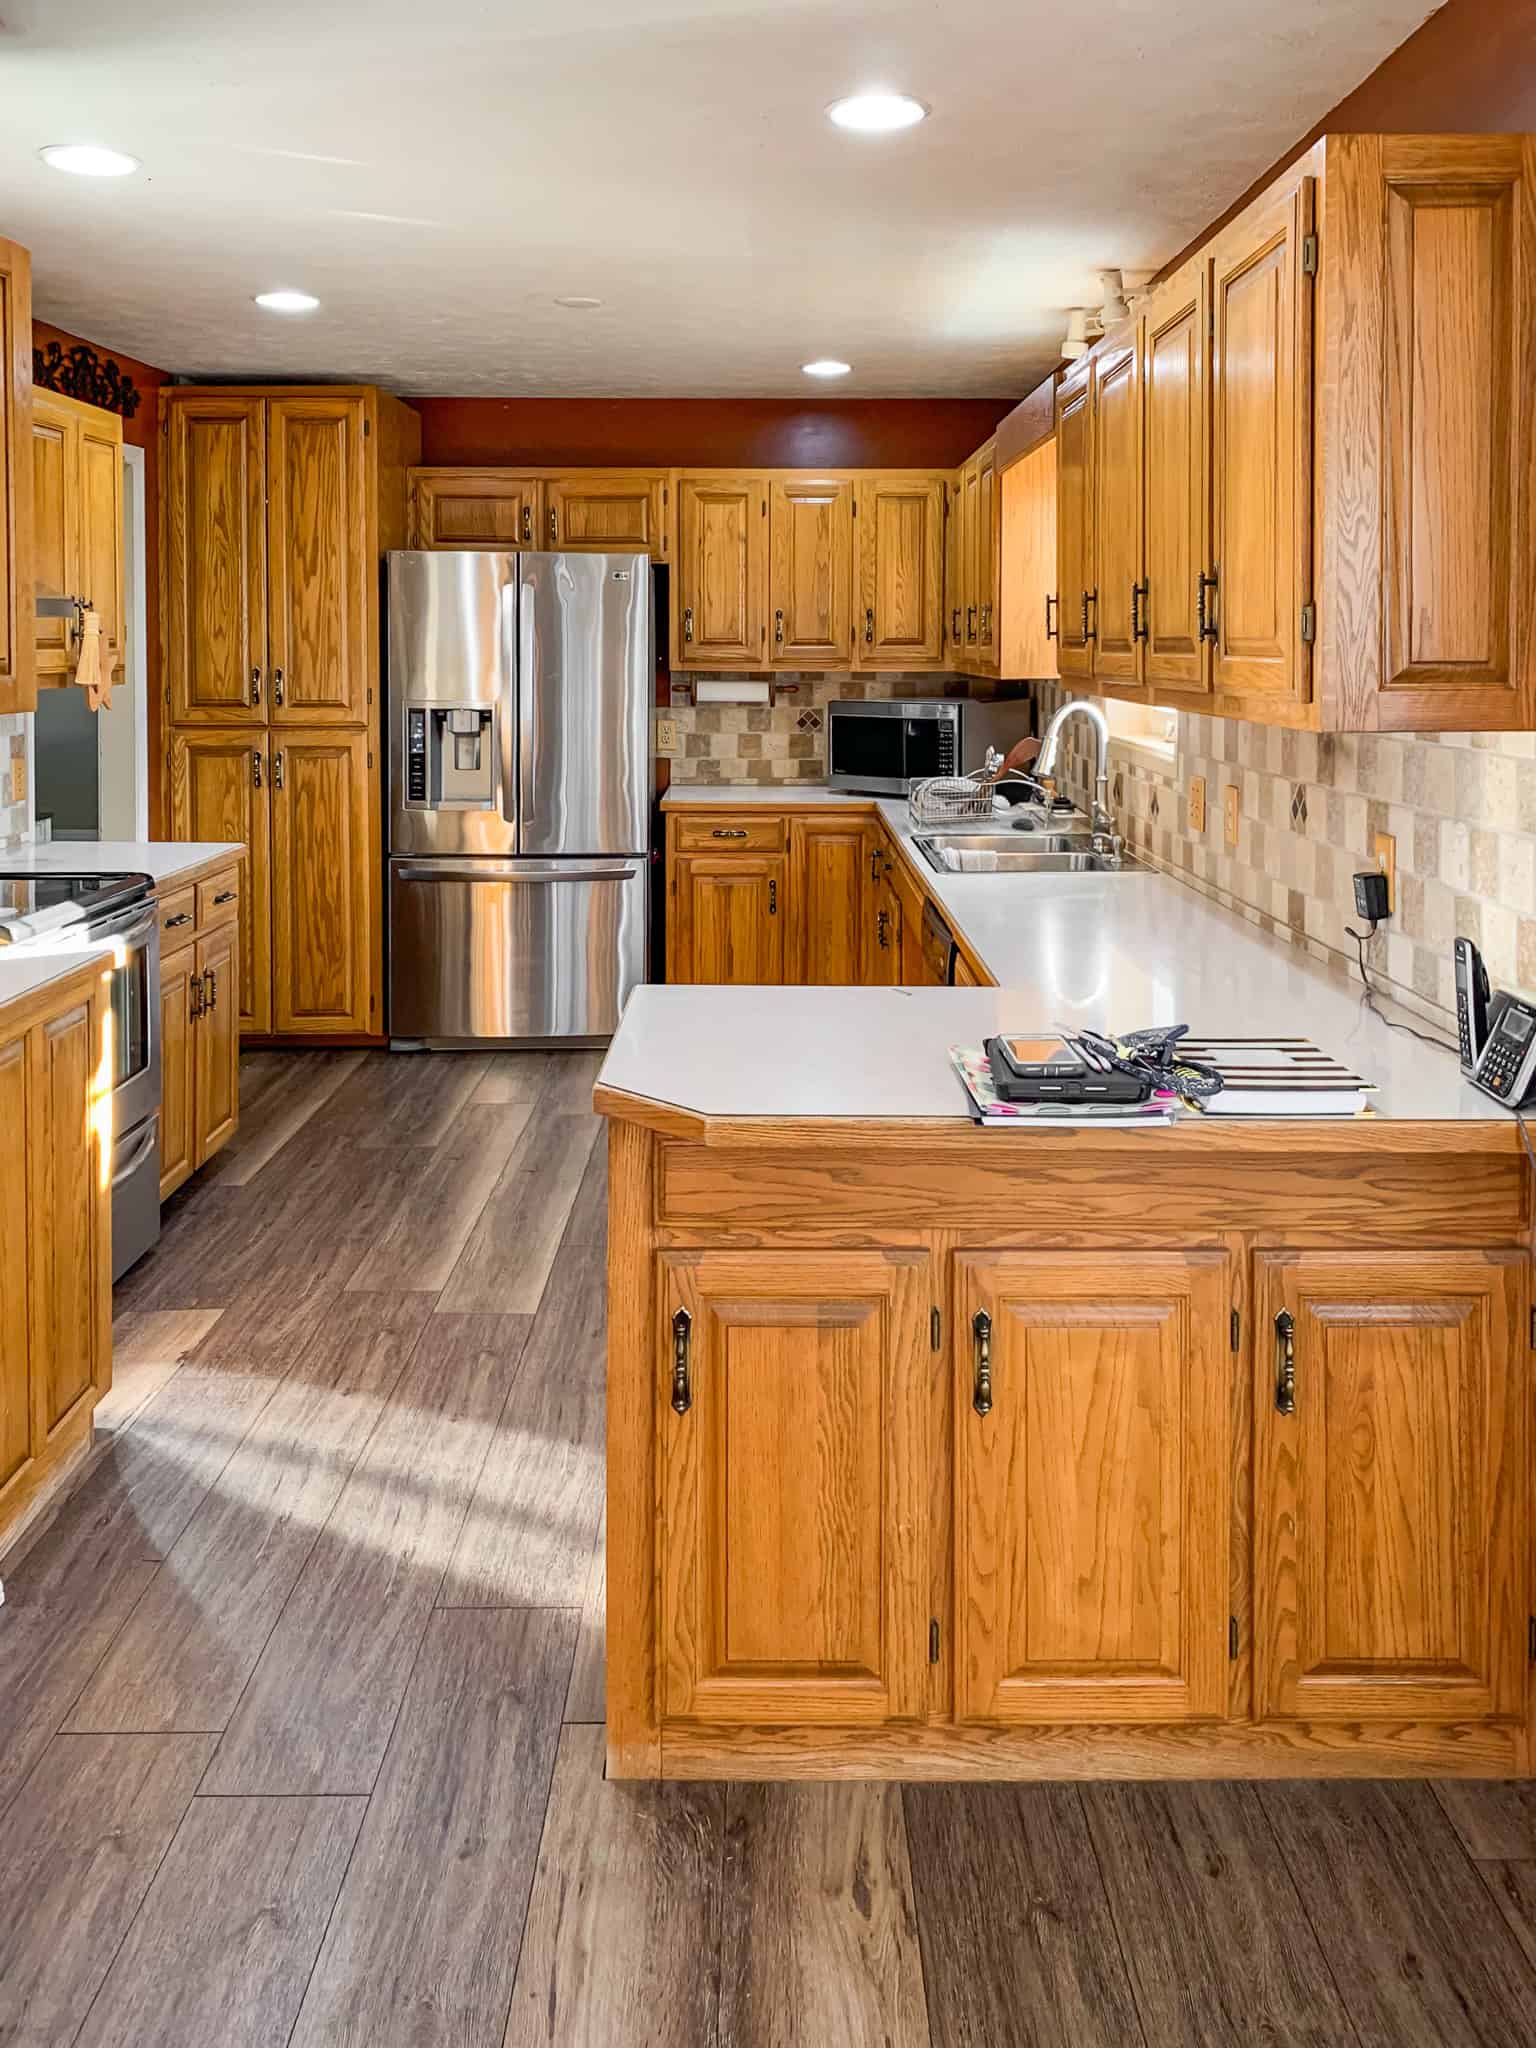 What Color Flooring With Honey Oak Cabinets | Floor Roma